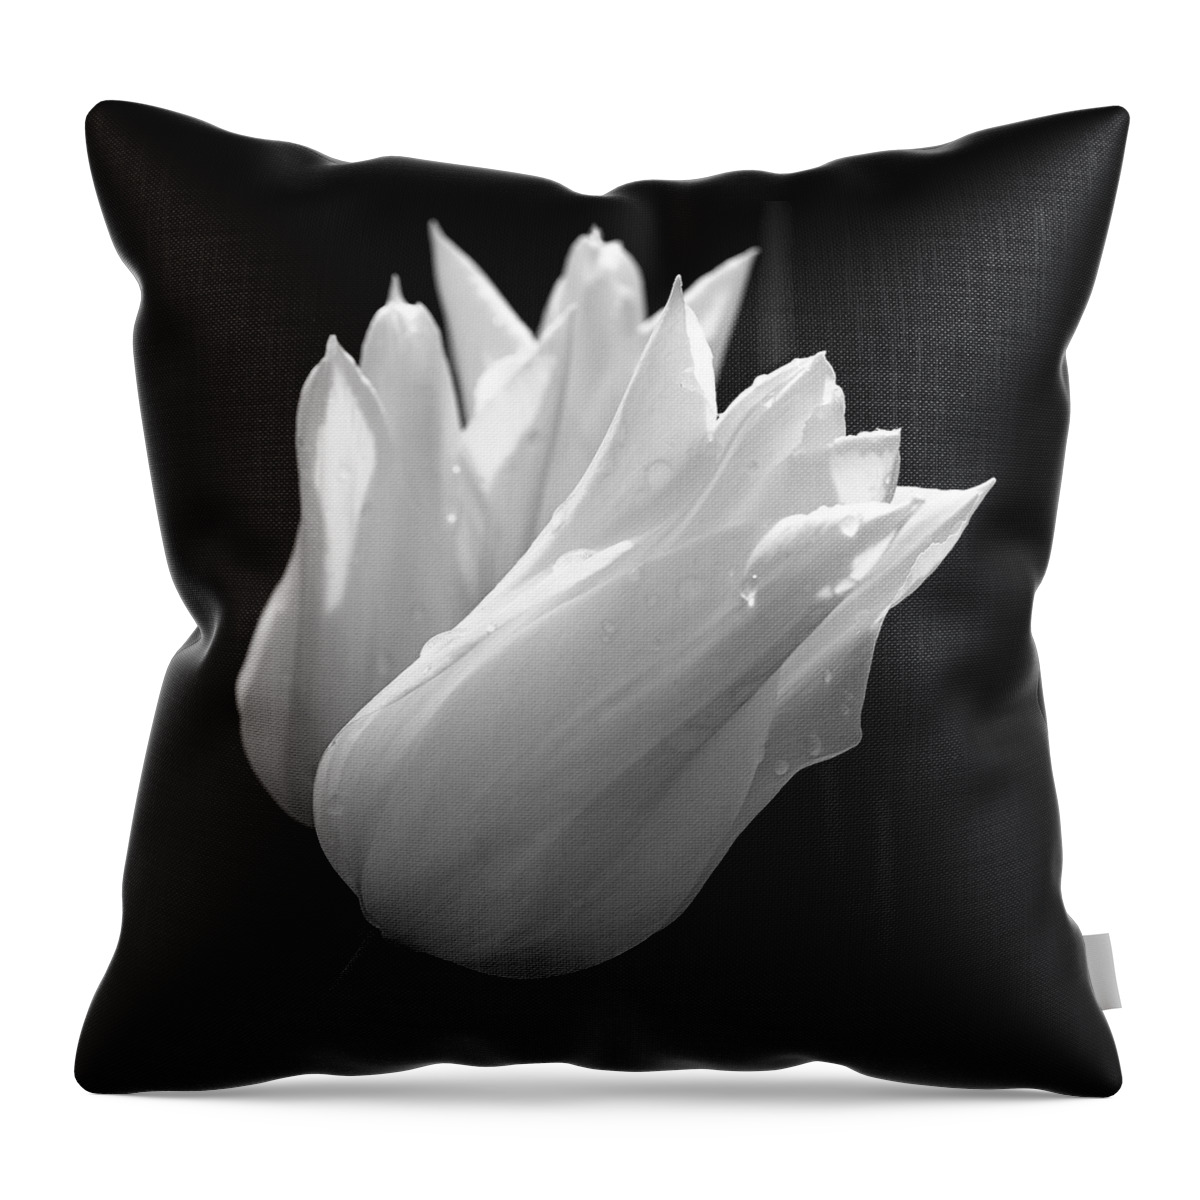 Tulips Throw Pillow featuring the photograph Sunlit White Tulips by Rona Black